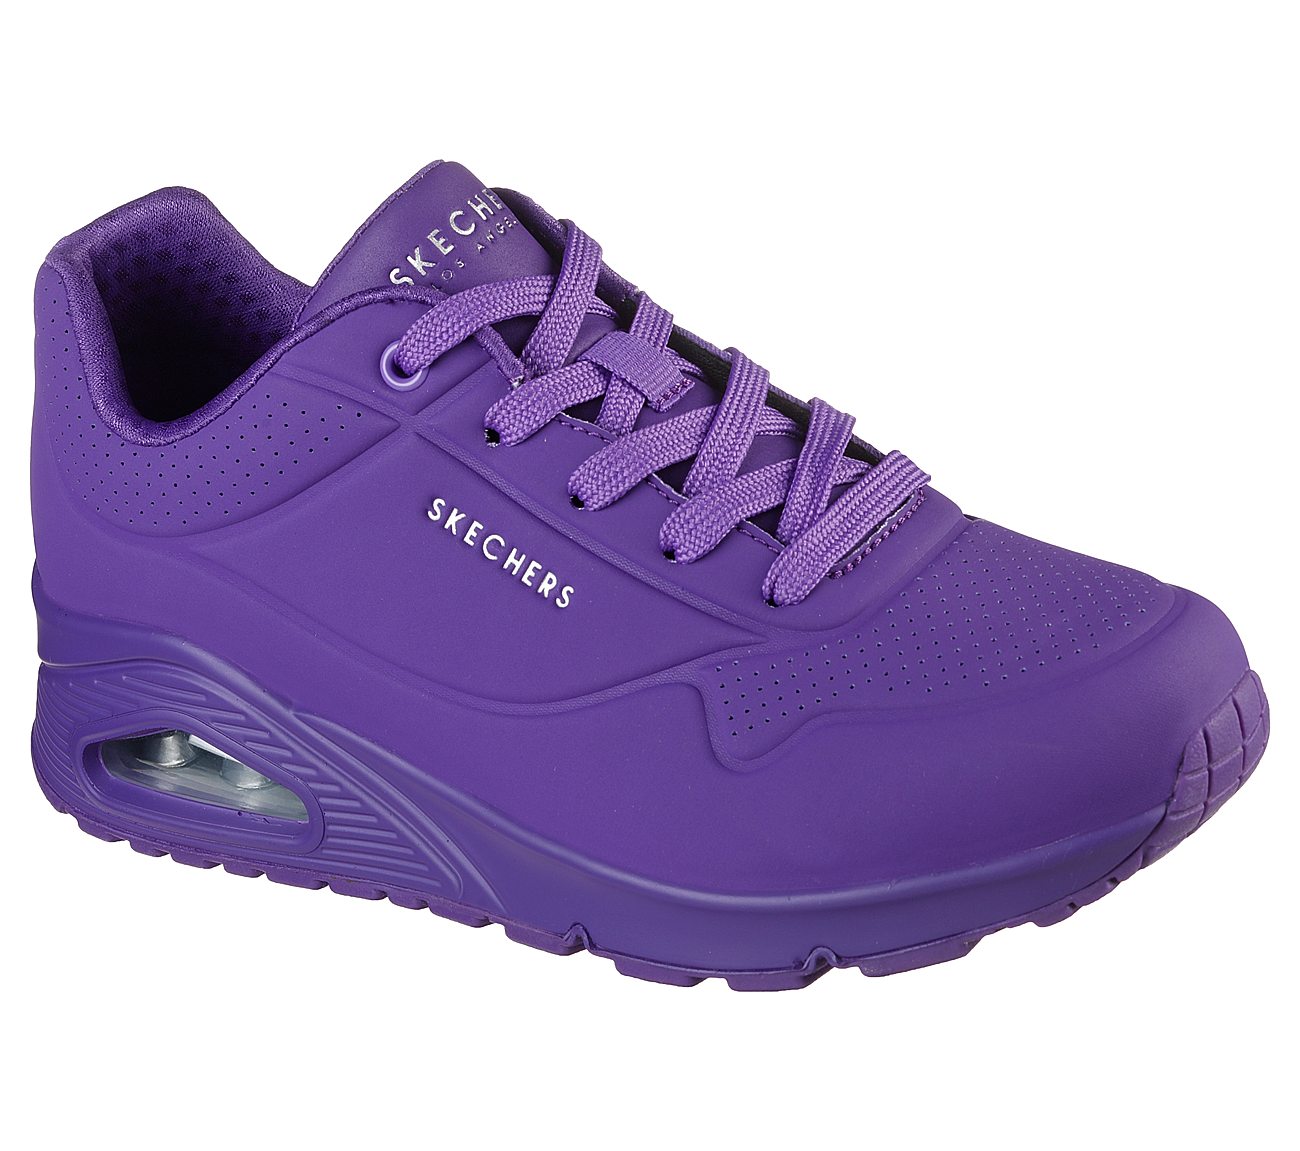 UNO - NIGHT SHADES, PURPLE Footwear Lateral View